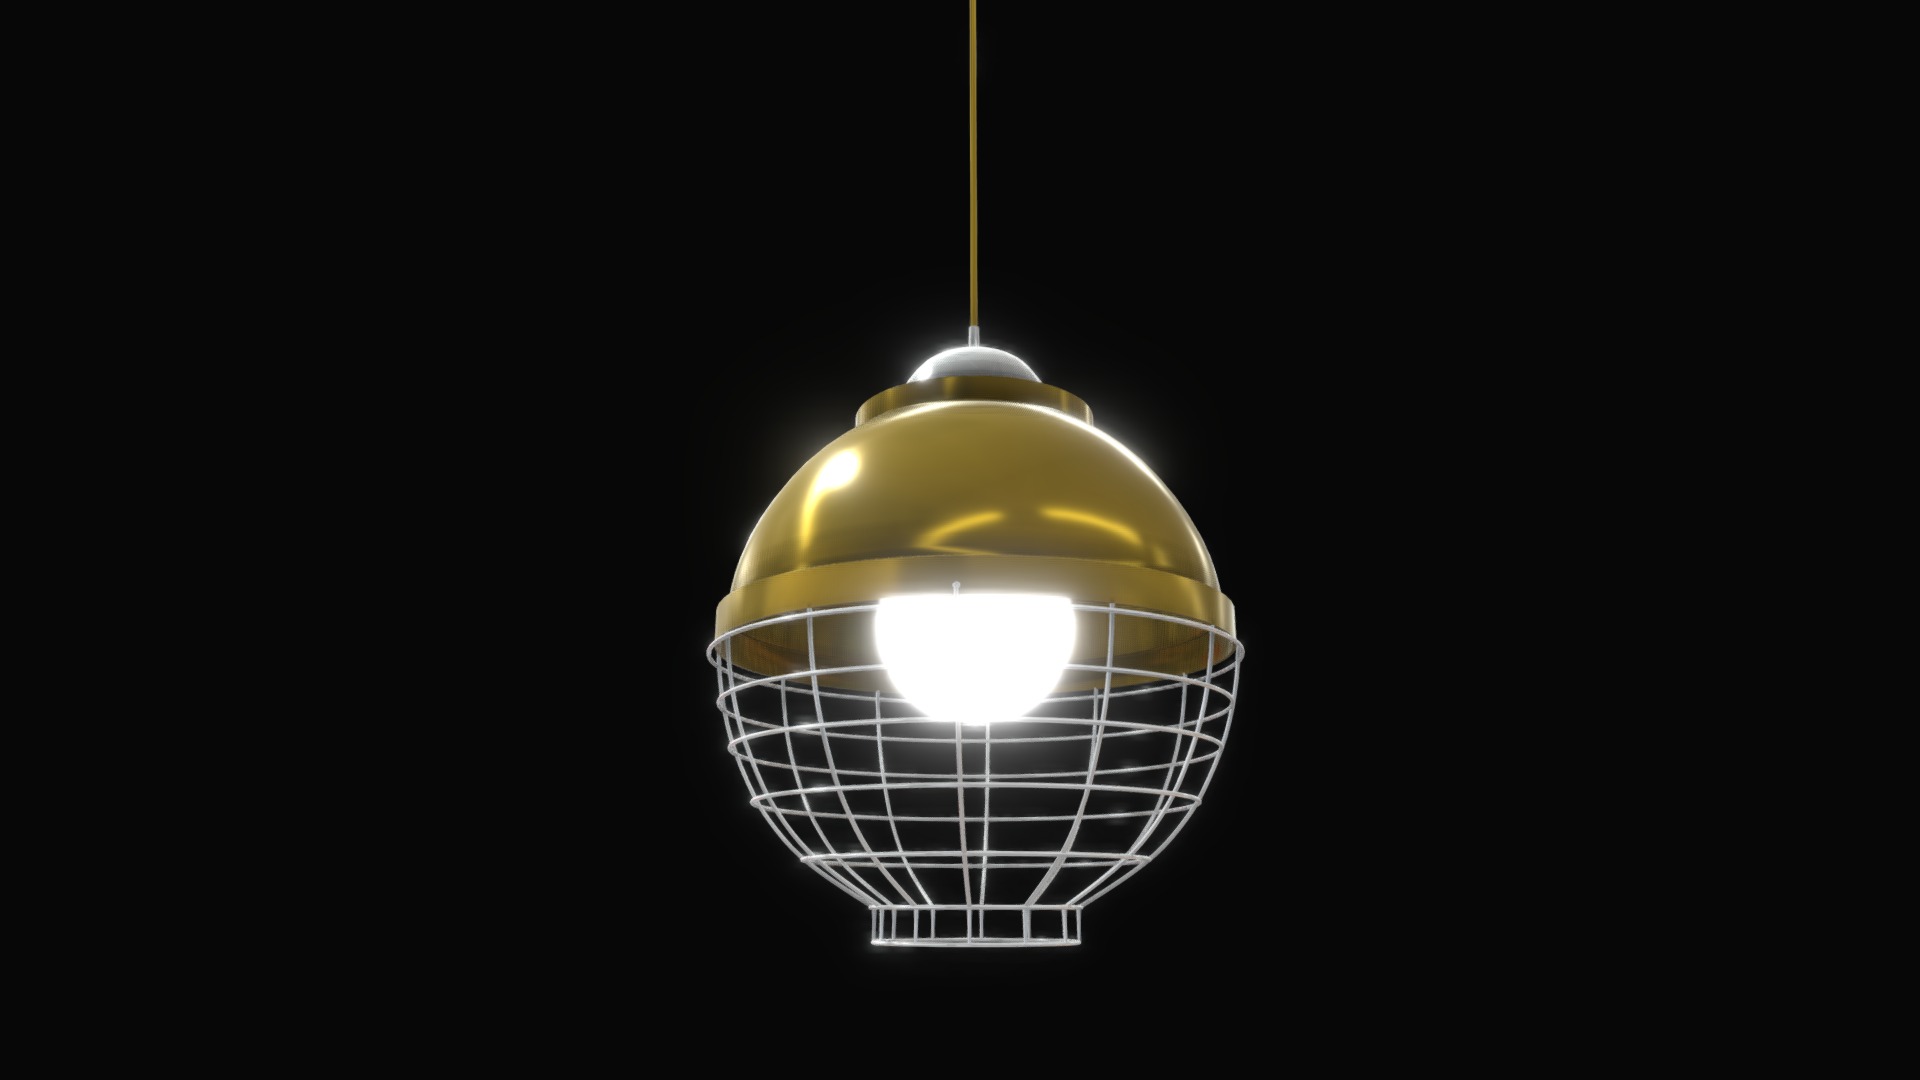 3D model HGPH-3678M - This is a 3D model of the HGPH-3678M. The 3D model is about a light bulb from a ceiling.